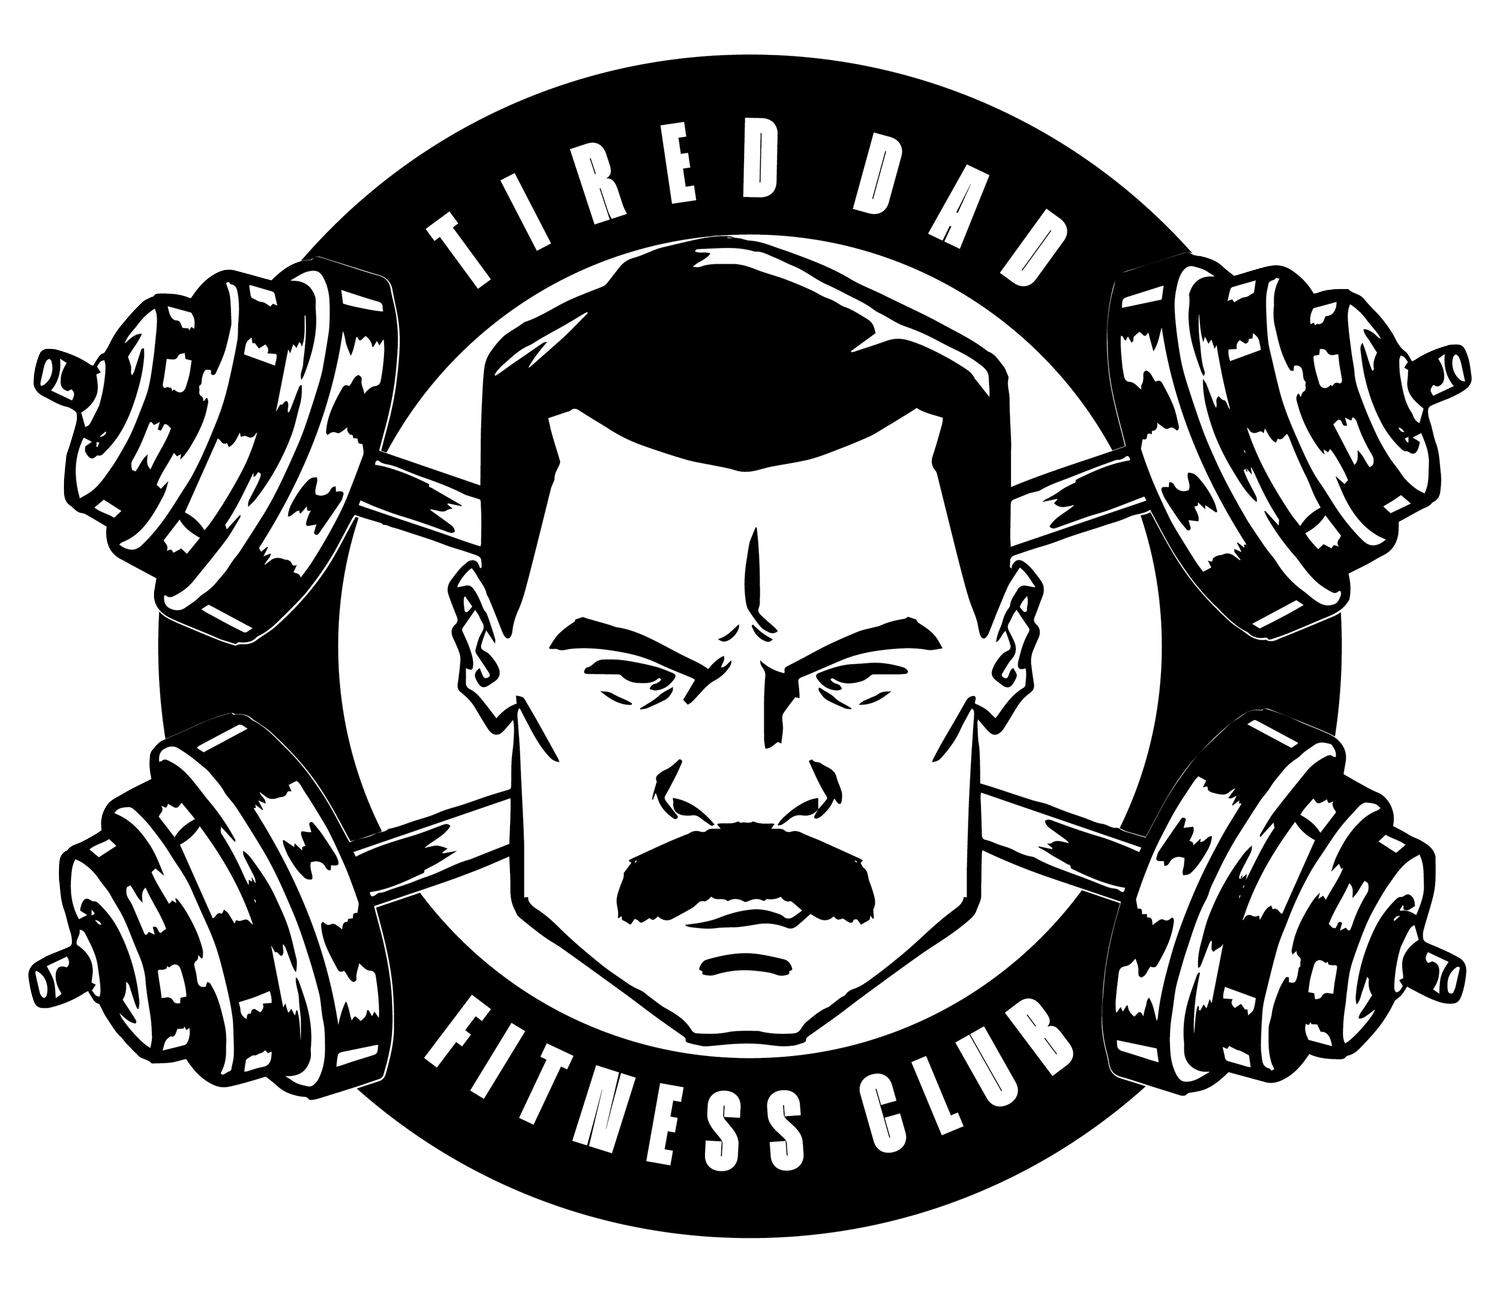 The Tired Dad Fitness Club